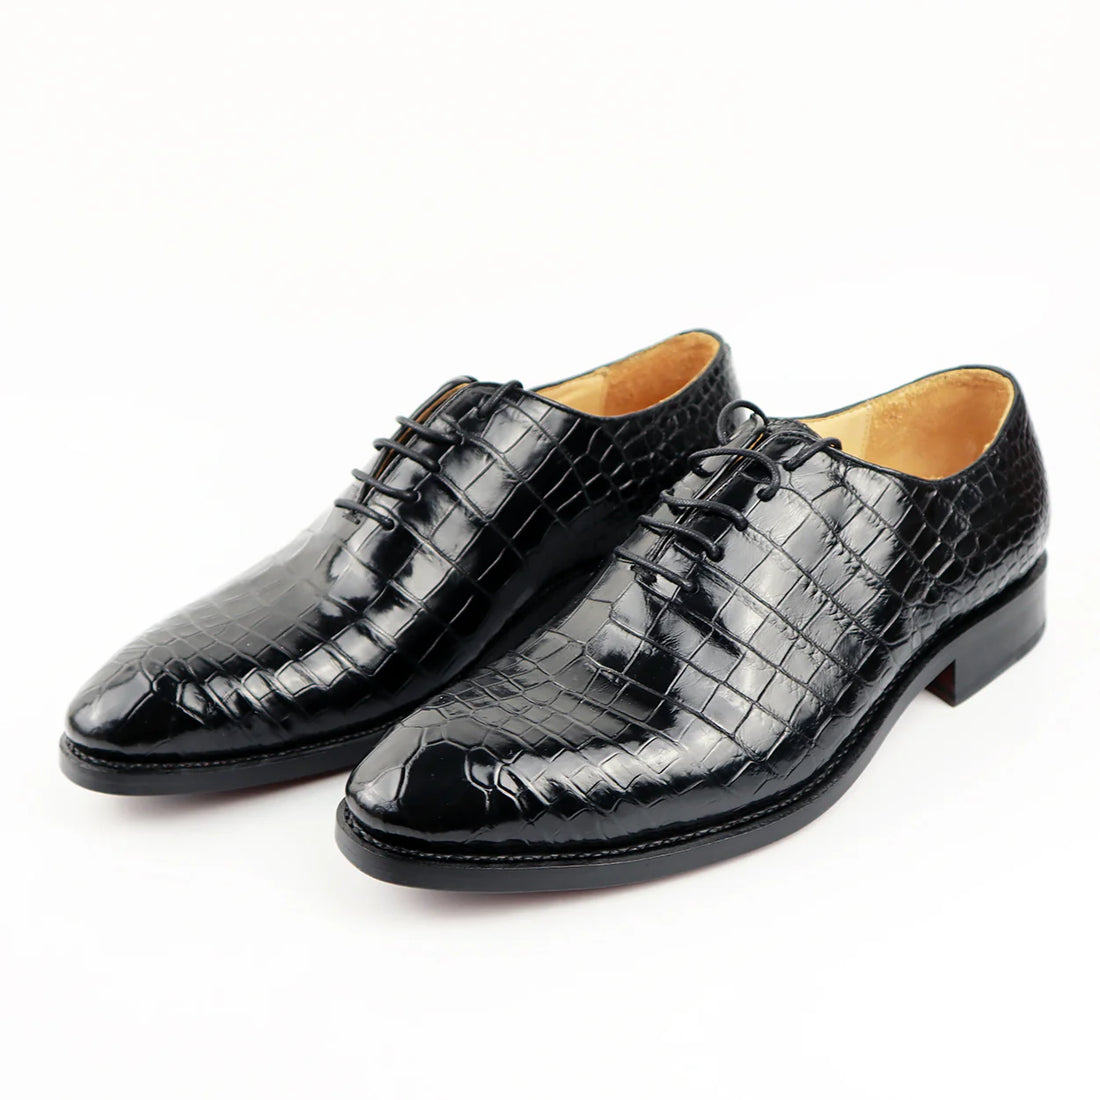 Step into Opulence: Crocodile Leather Shoes - A Guide to Luxury Footwear